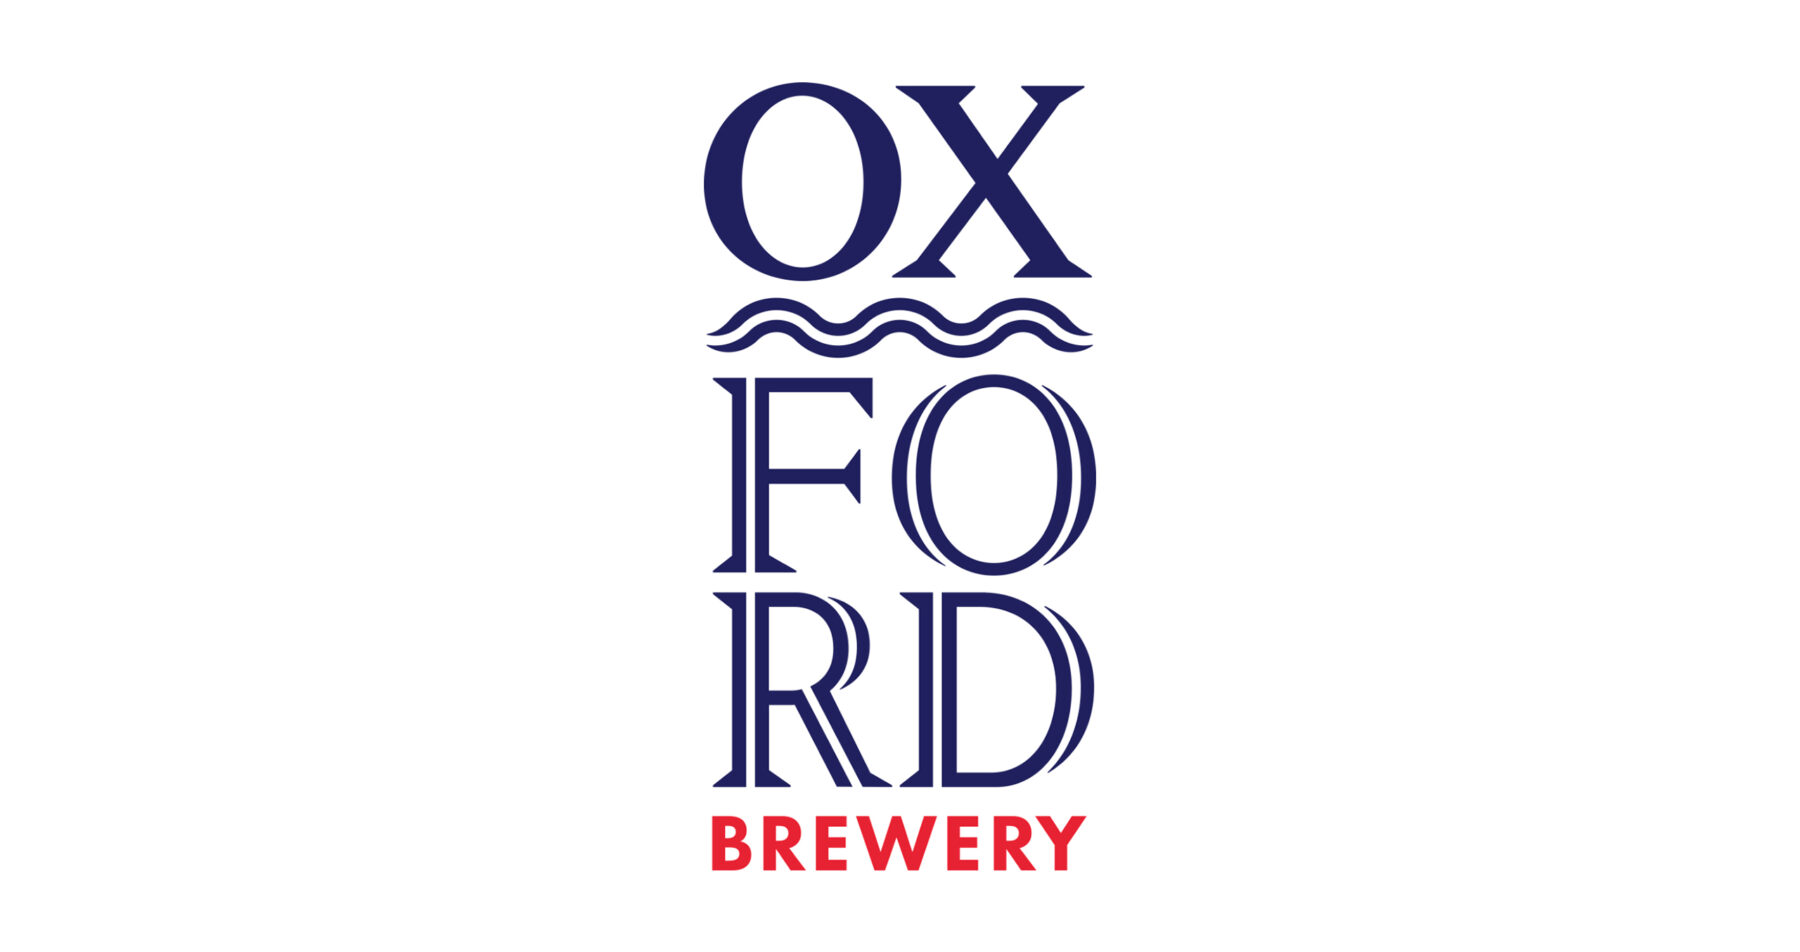 Oxford Brewery wins gold again!